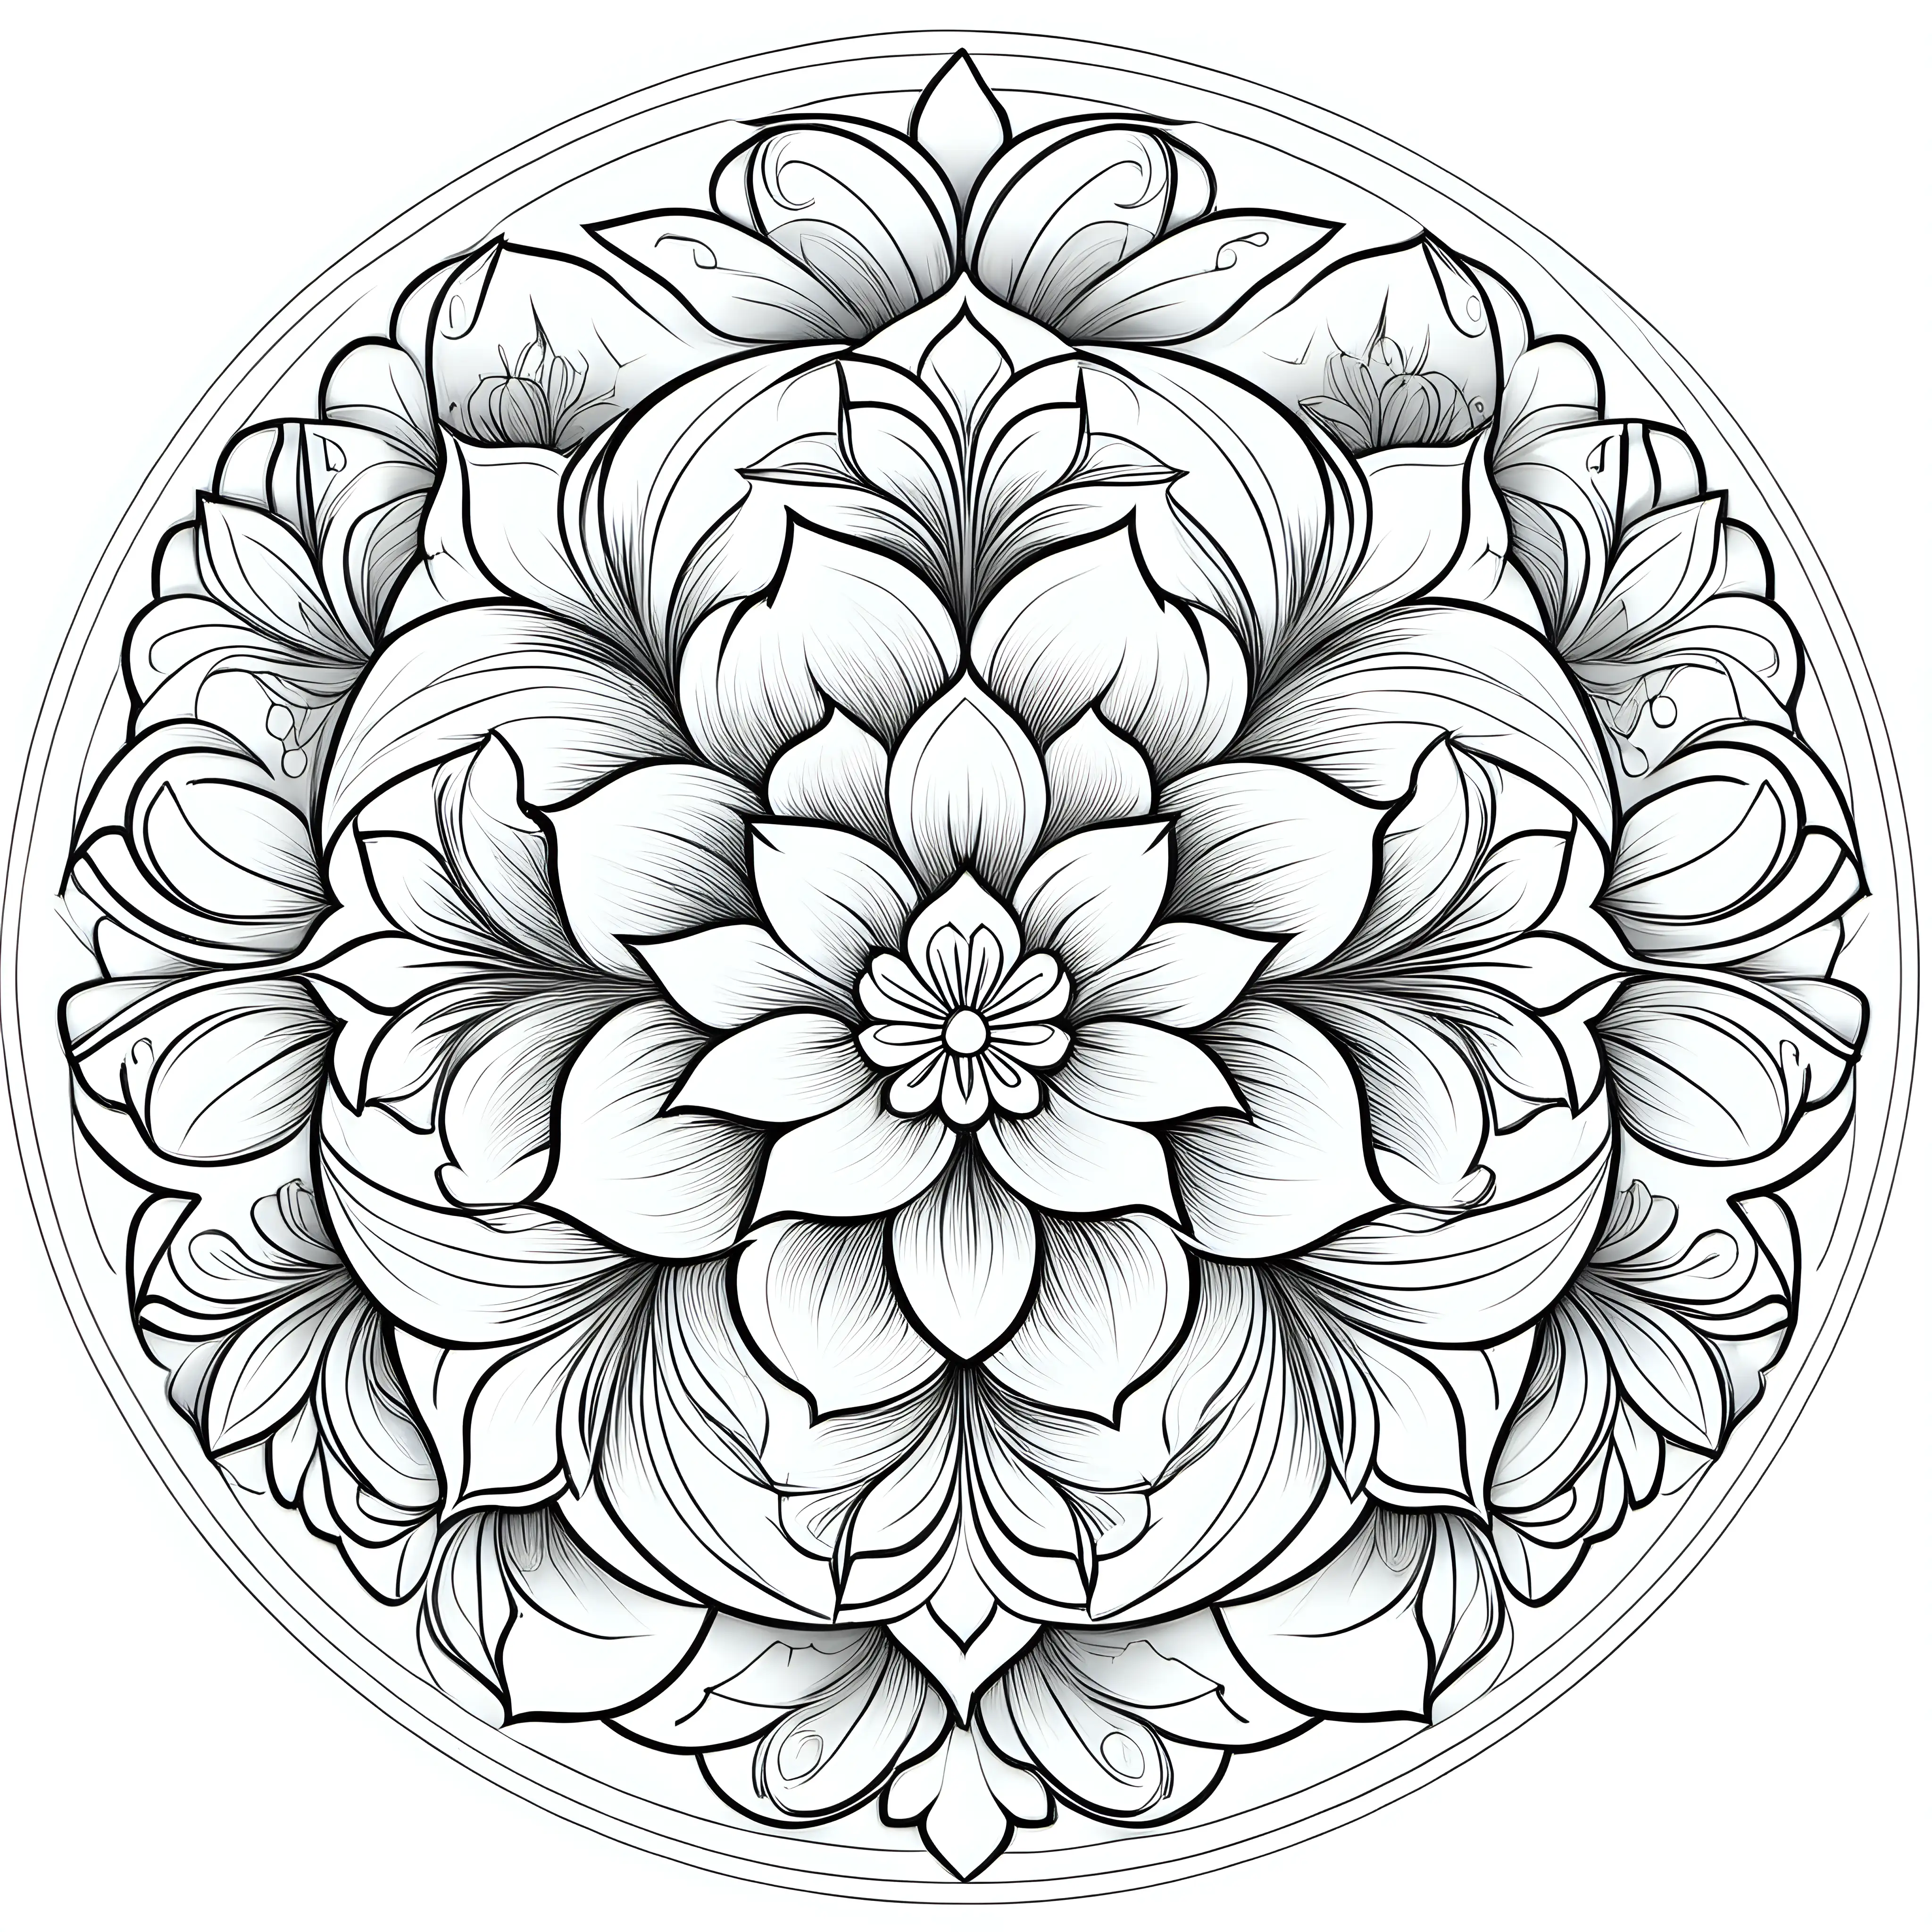 Floral Mandala Coloring Design with Intricate Symmetry